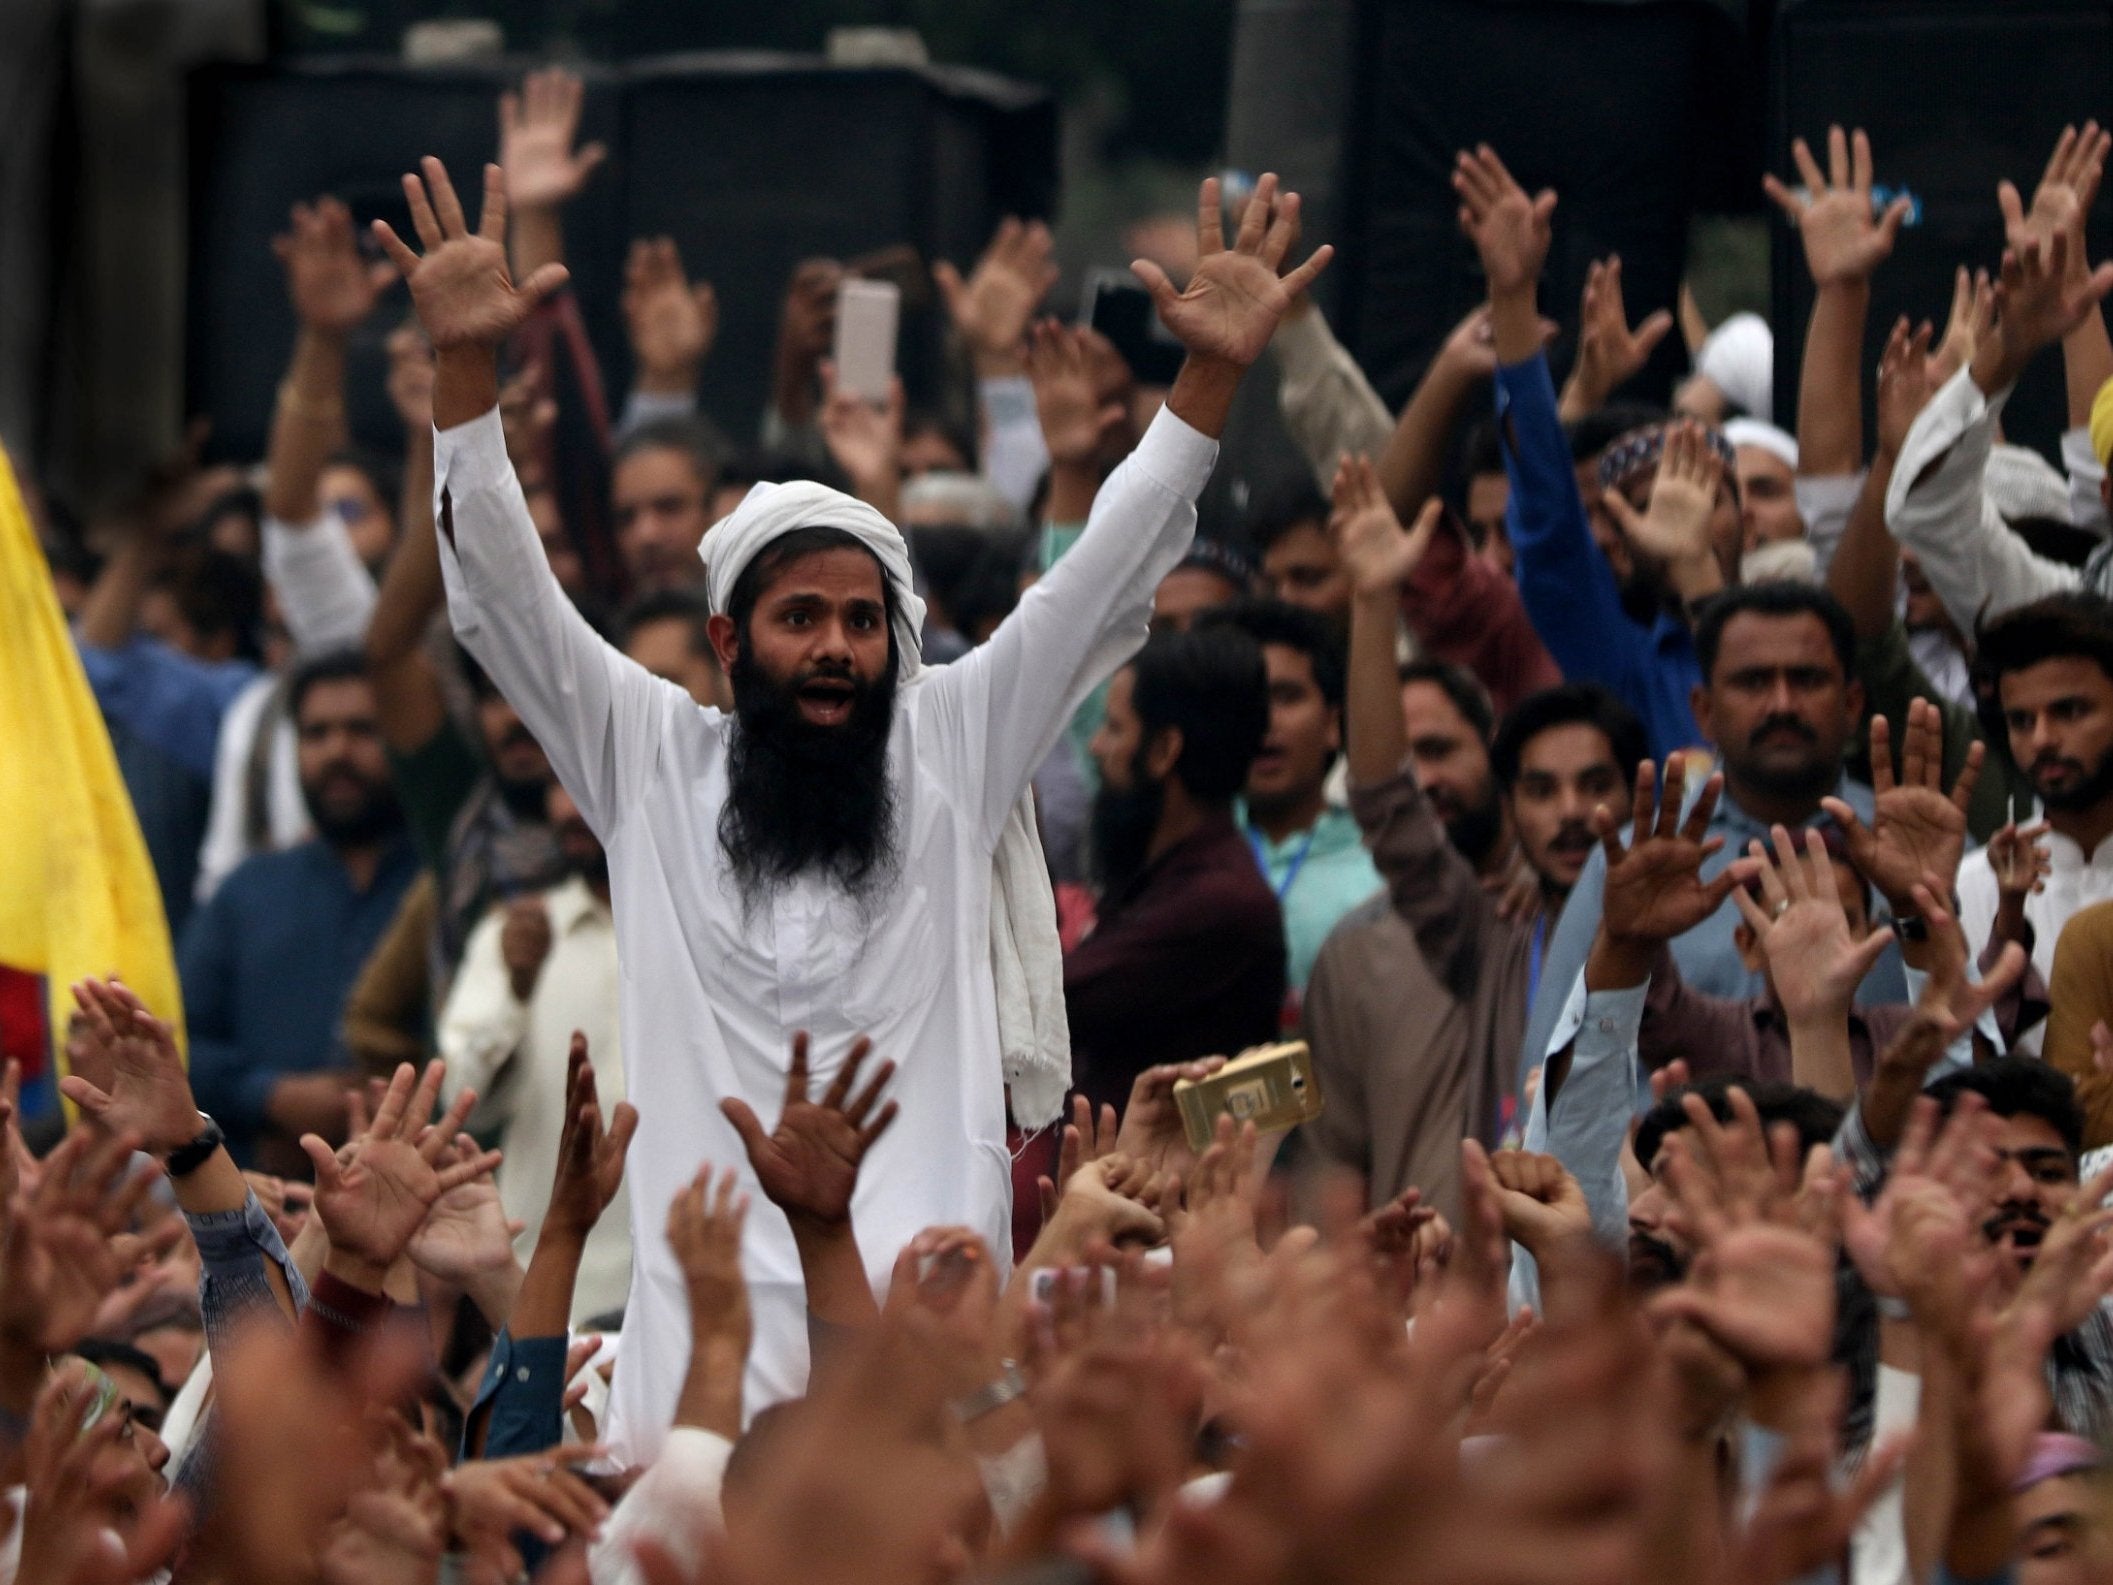 Supporters of far-right Islamist party TLP party protest at the acquittal of Asia Bibi